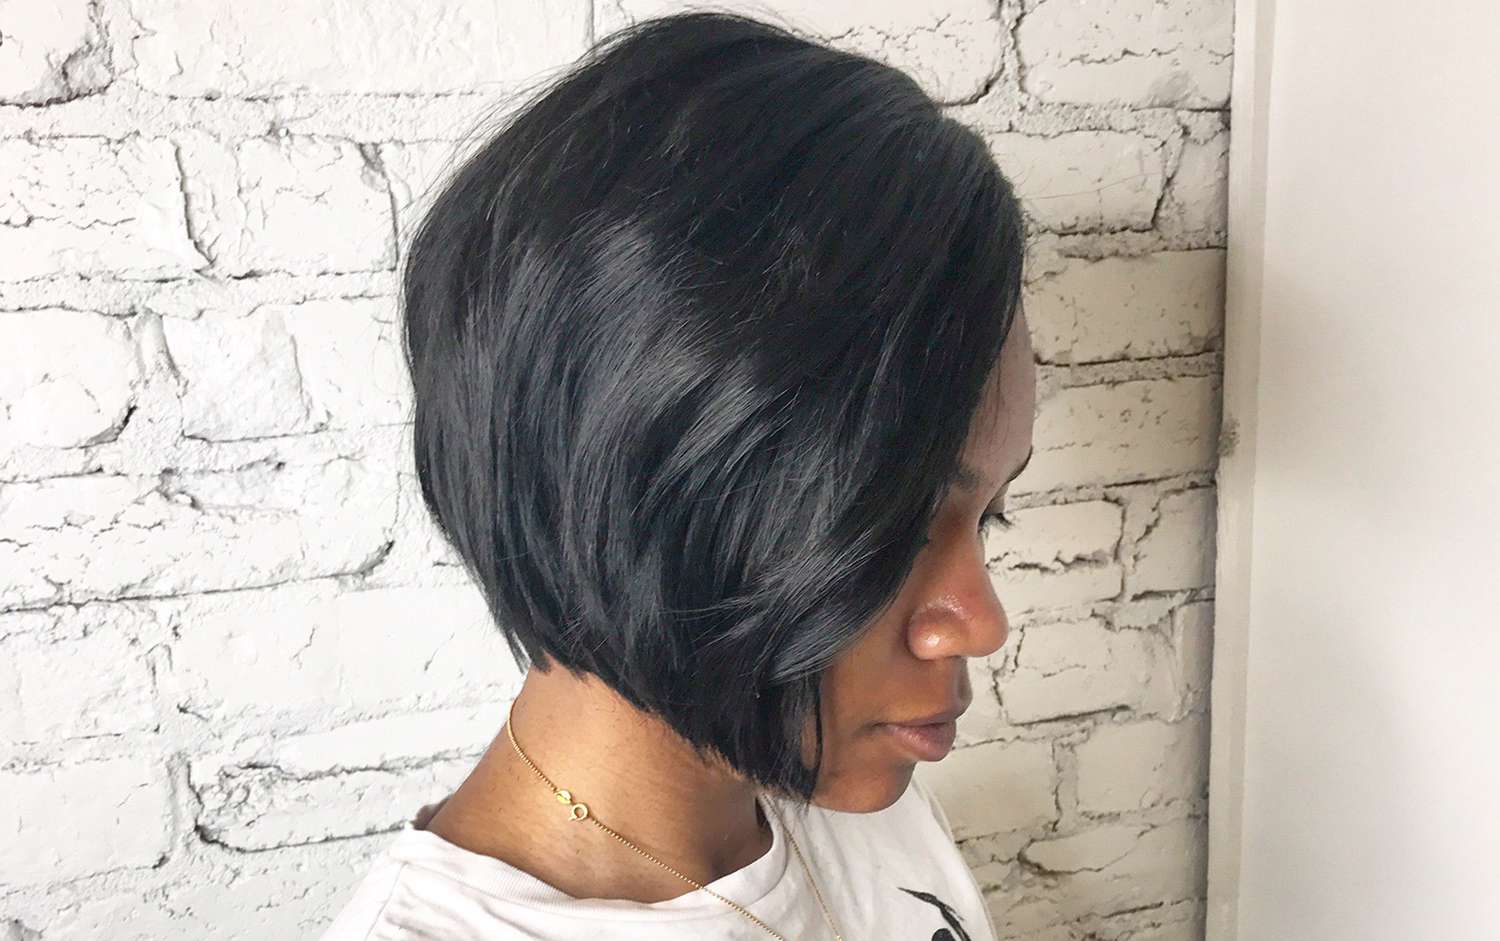 Ethnic woman with a textured bob haircut